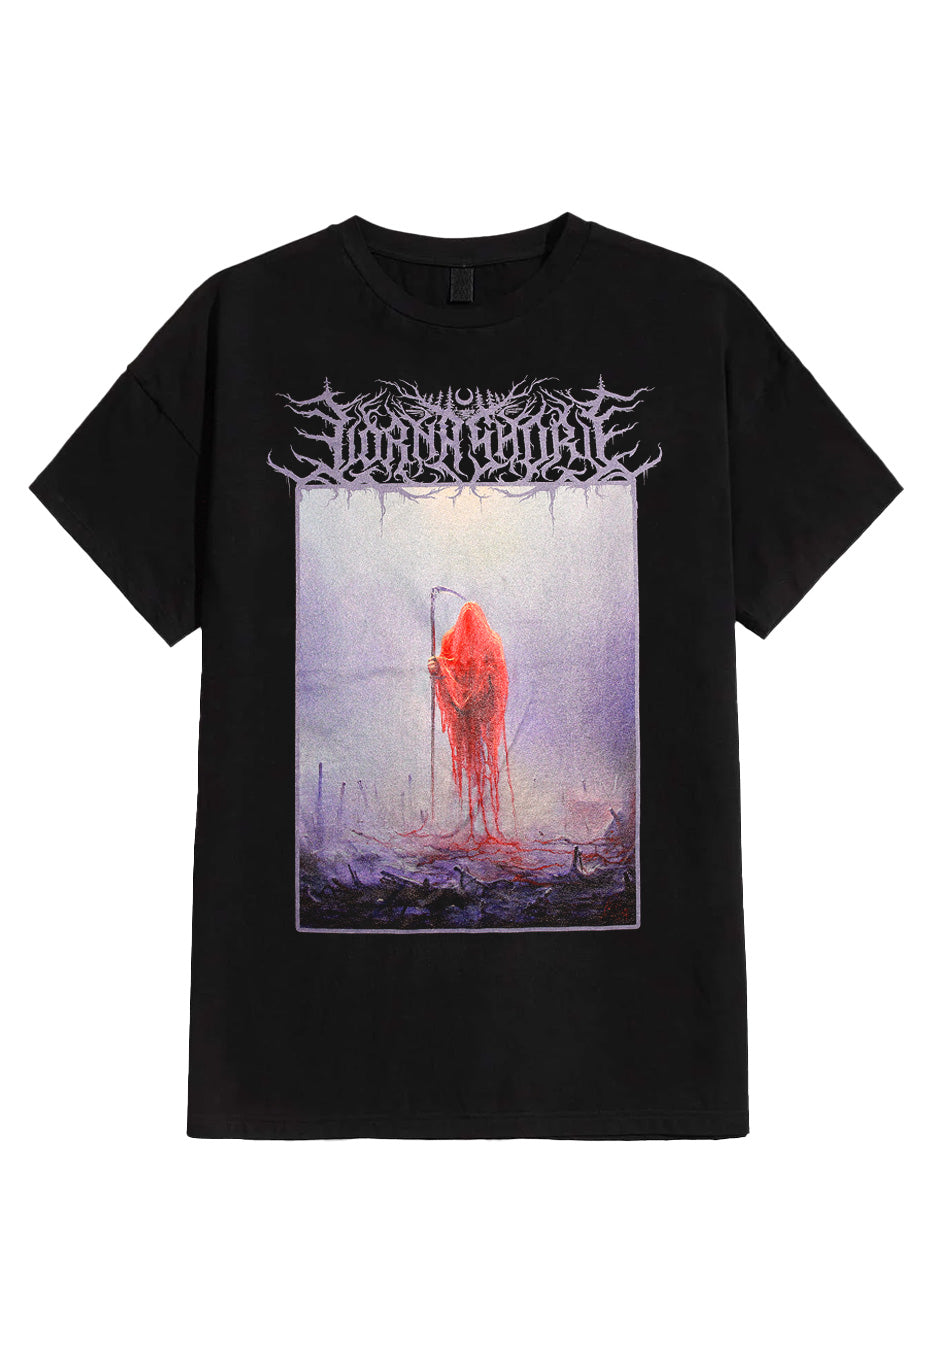 Lorna Shore - And I Return To Nothingness Cover - T-Shirt | Neutral-Image